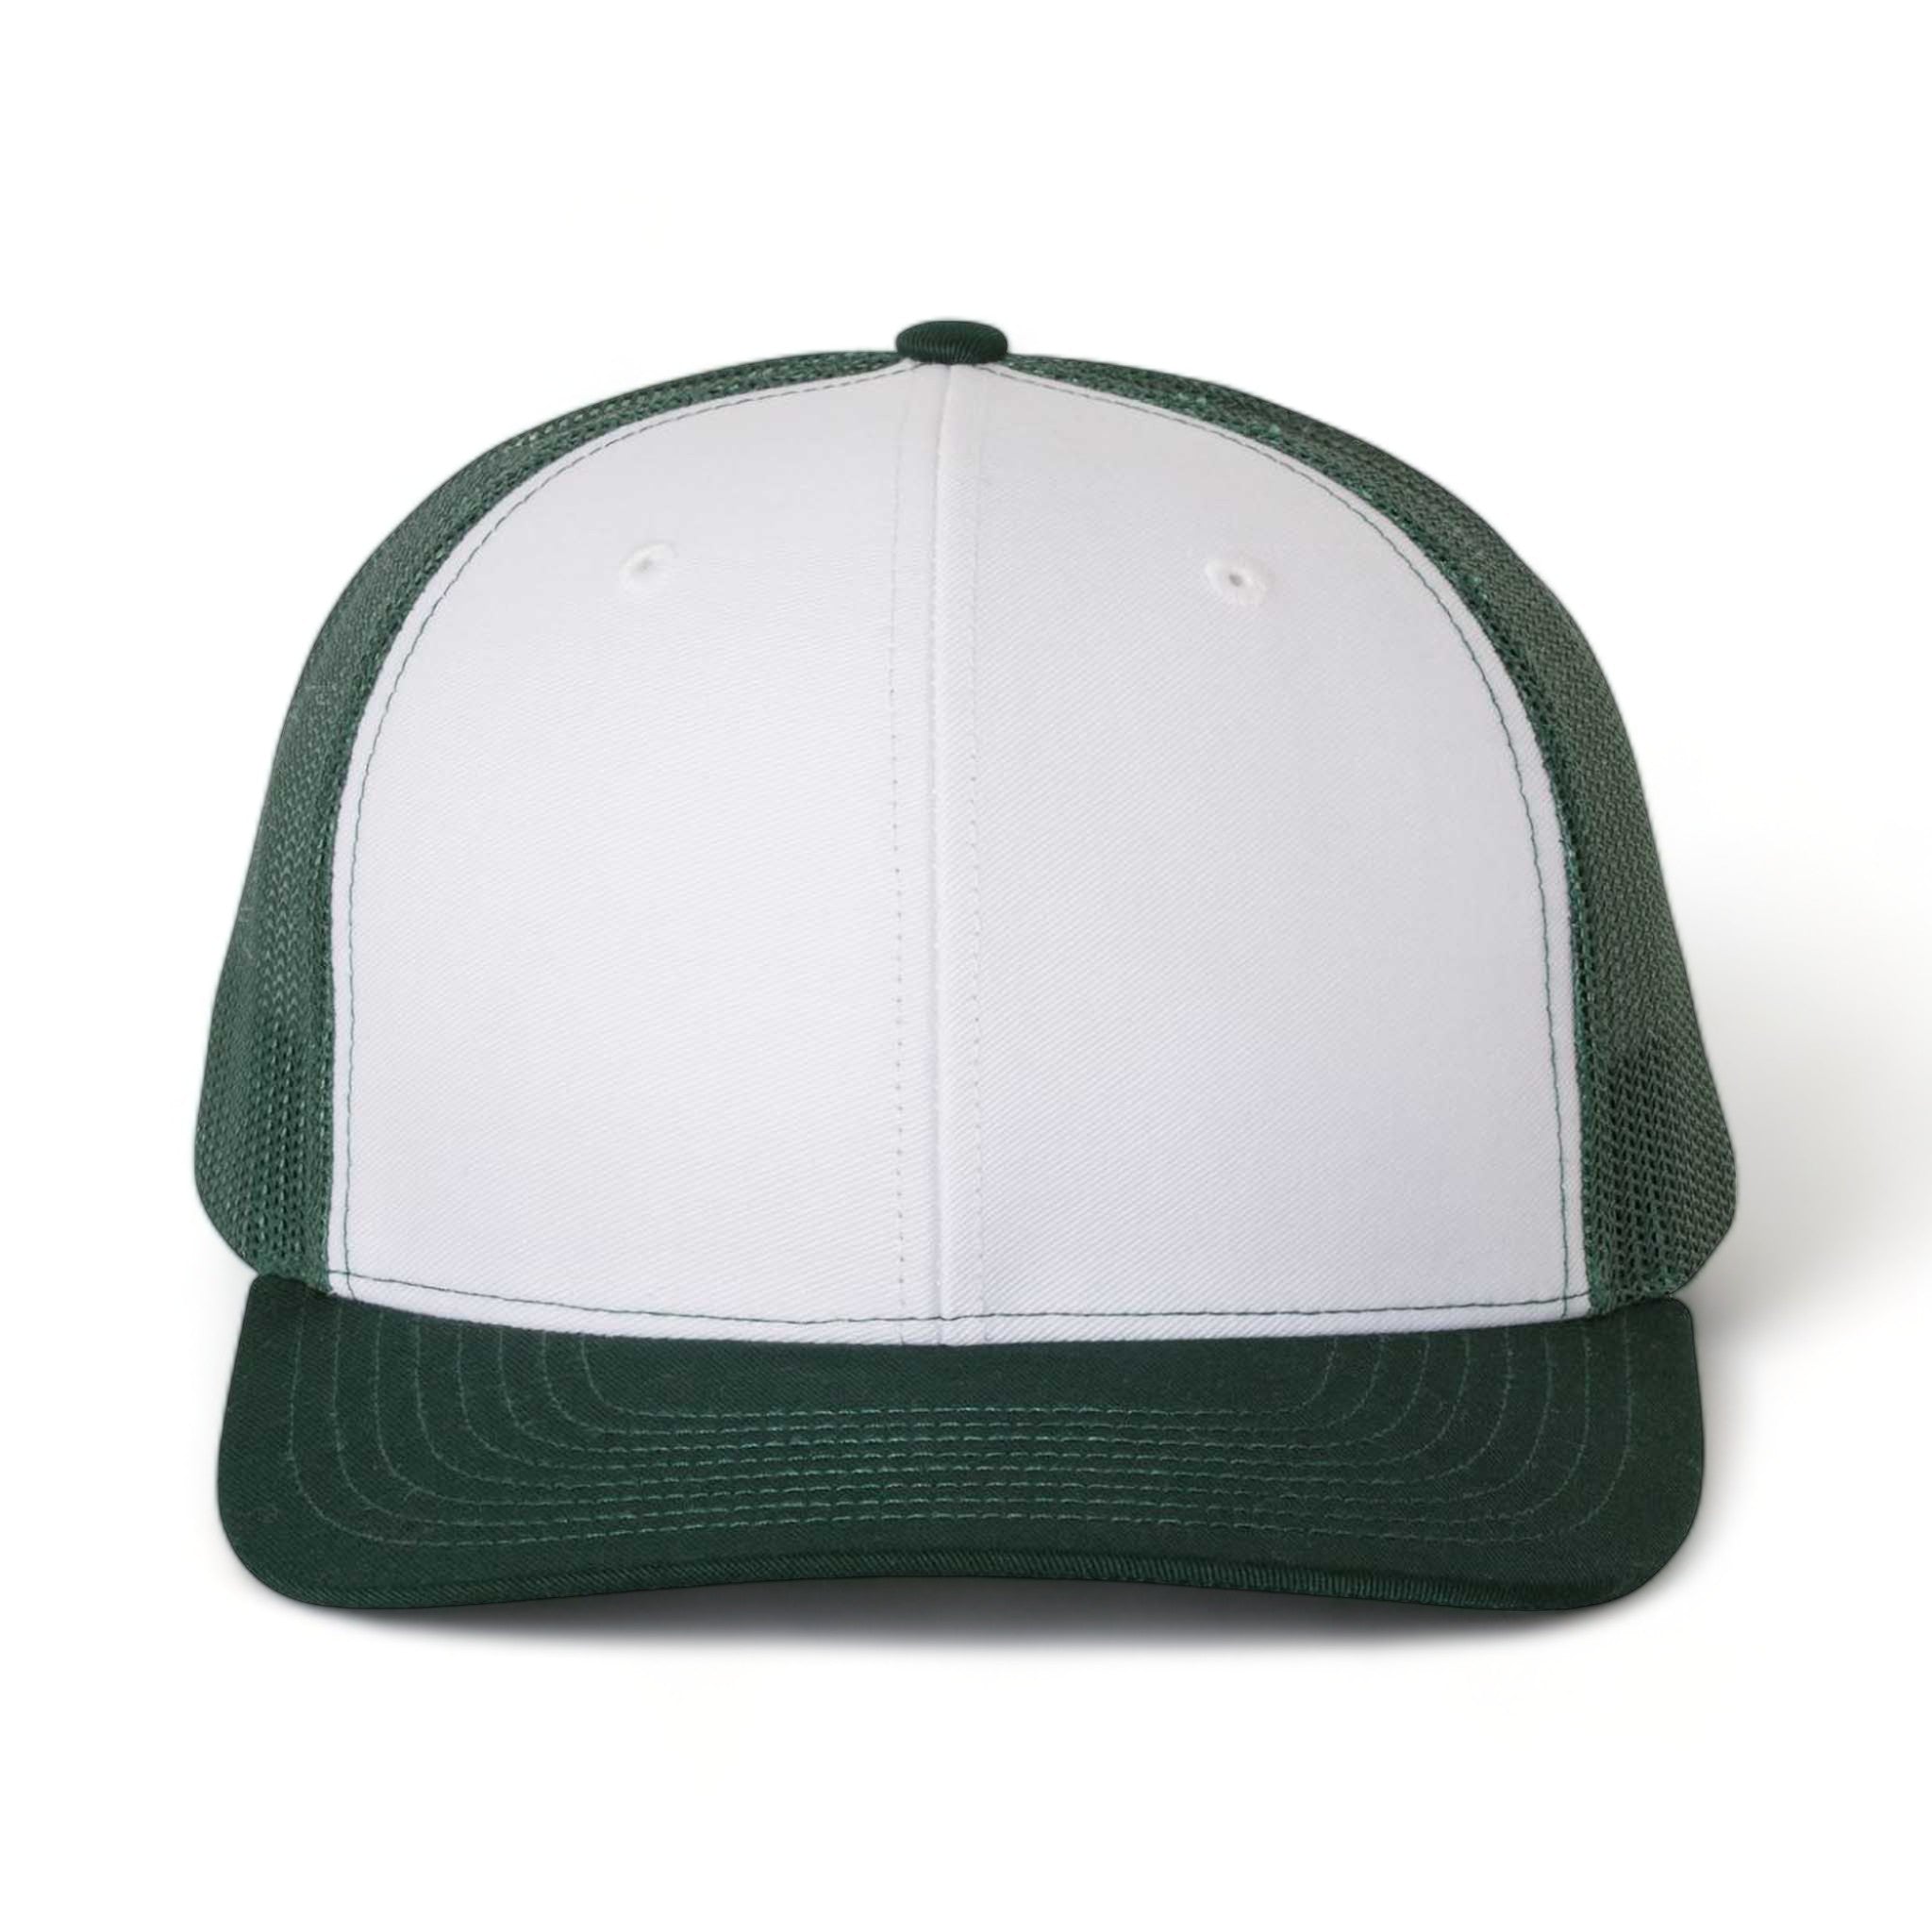 Front view of Richardson 112 custom hat in white and dark green